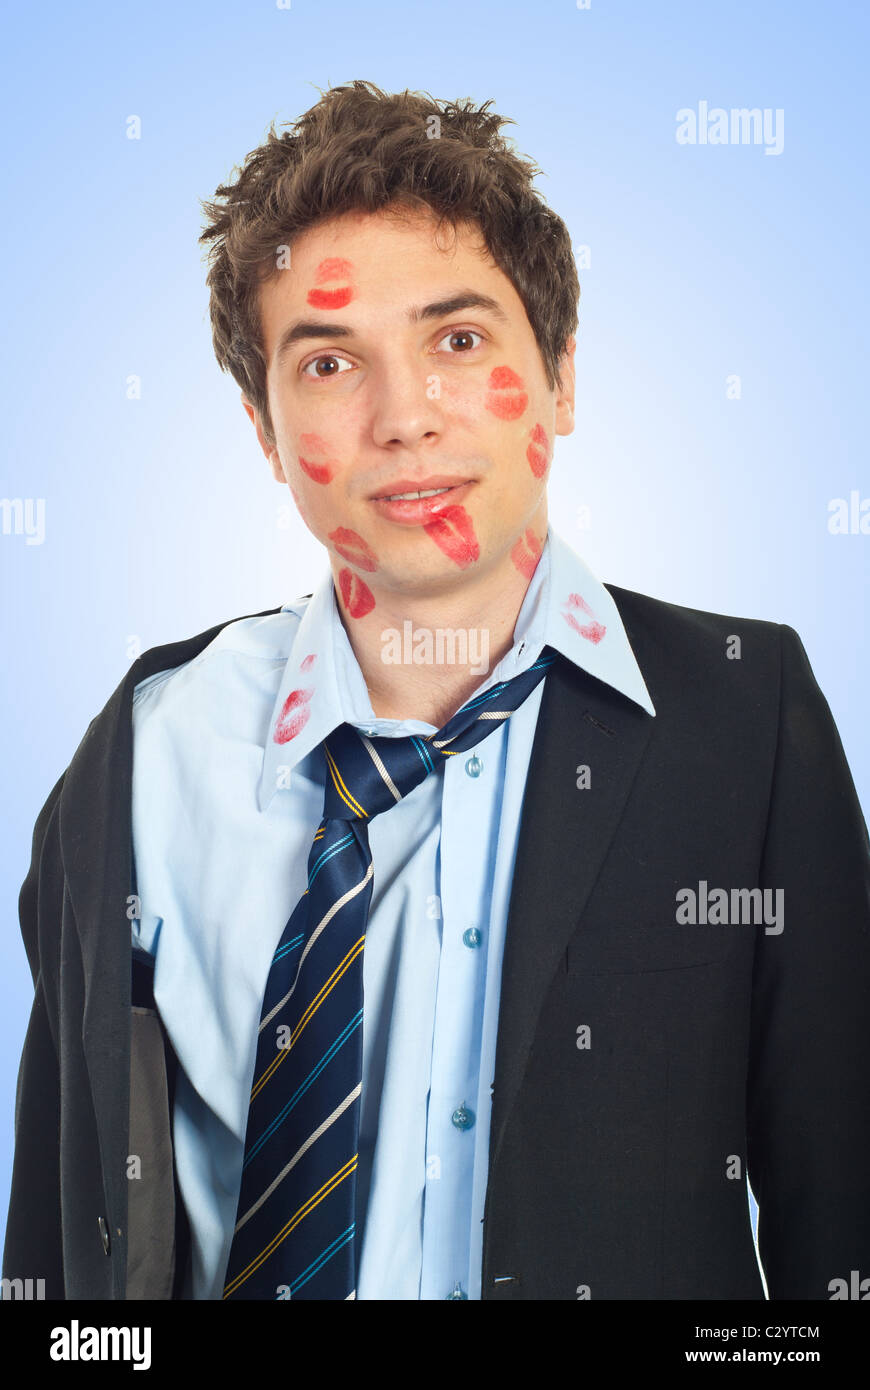 Surprised kissed man in business suit over blue background Stock Photo